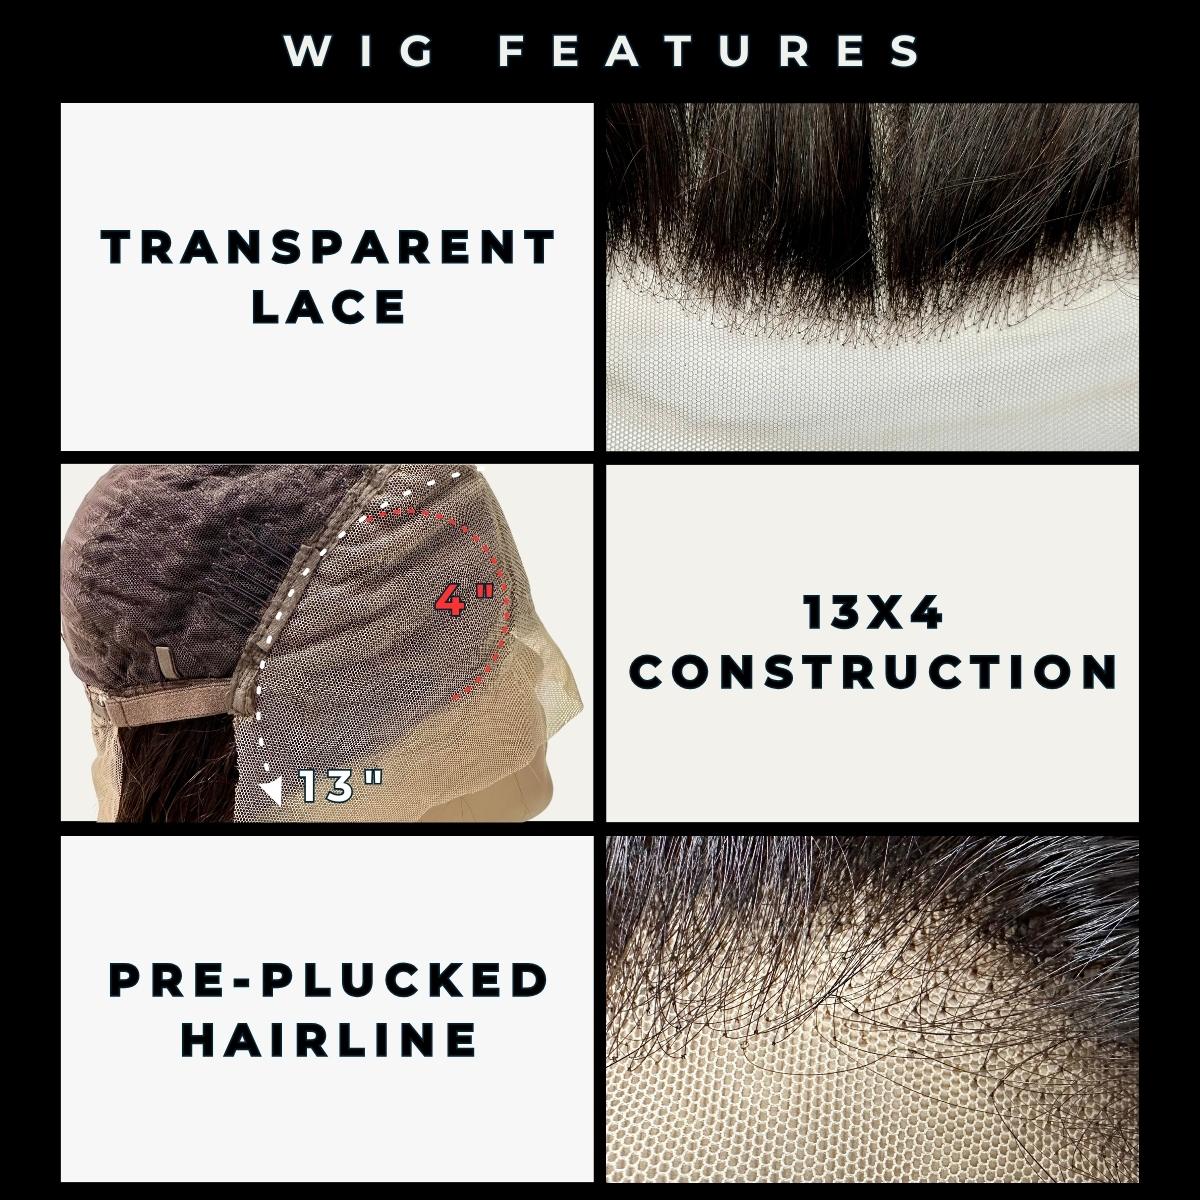 wig features- transparent Lace- 13x4 construction- pre-plucked hairline